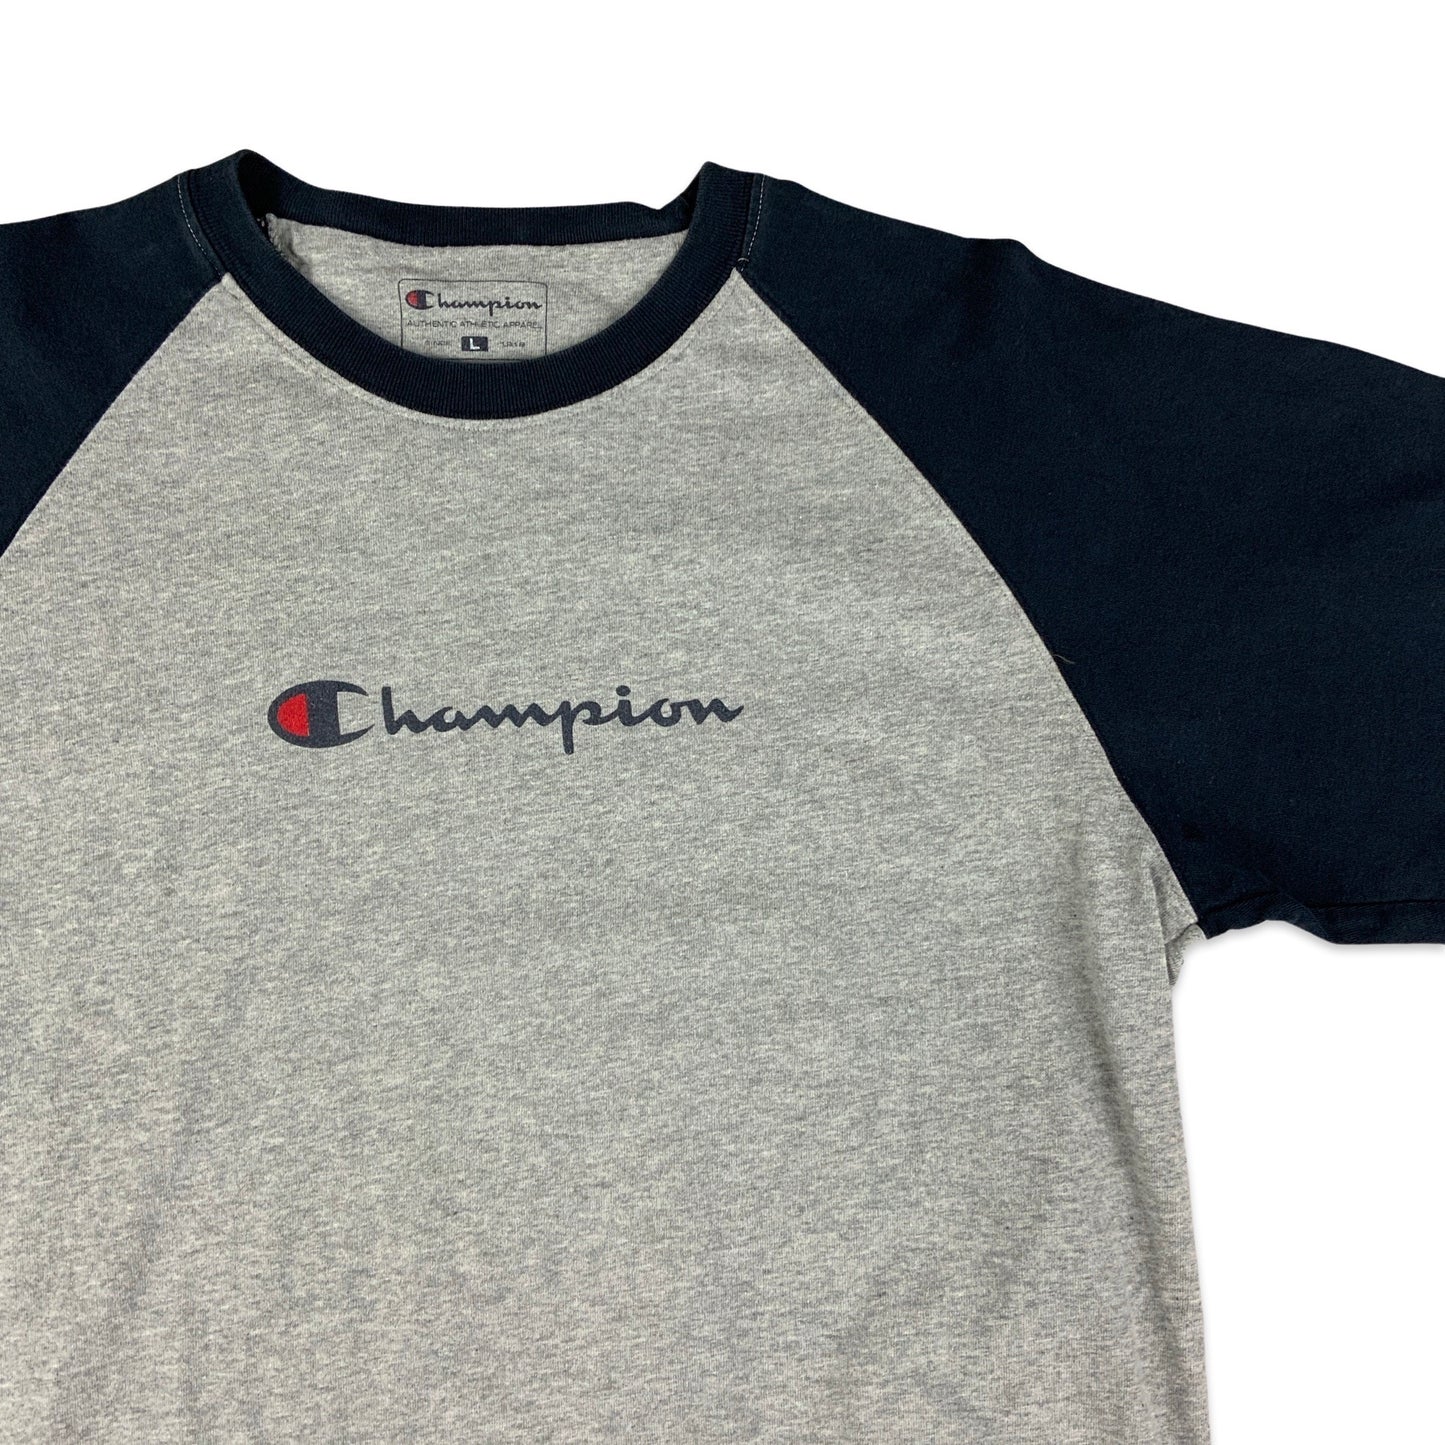 Champion Navy and Grey Long Sleeved Tee S M